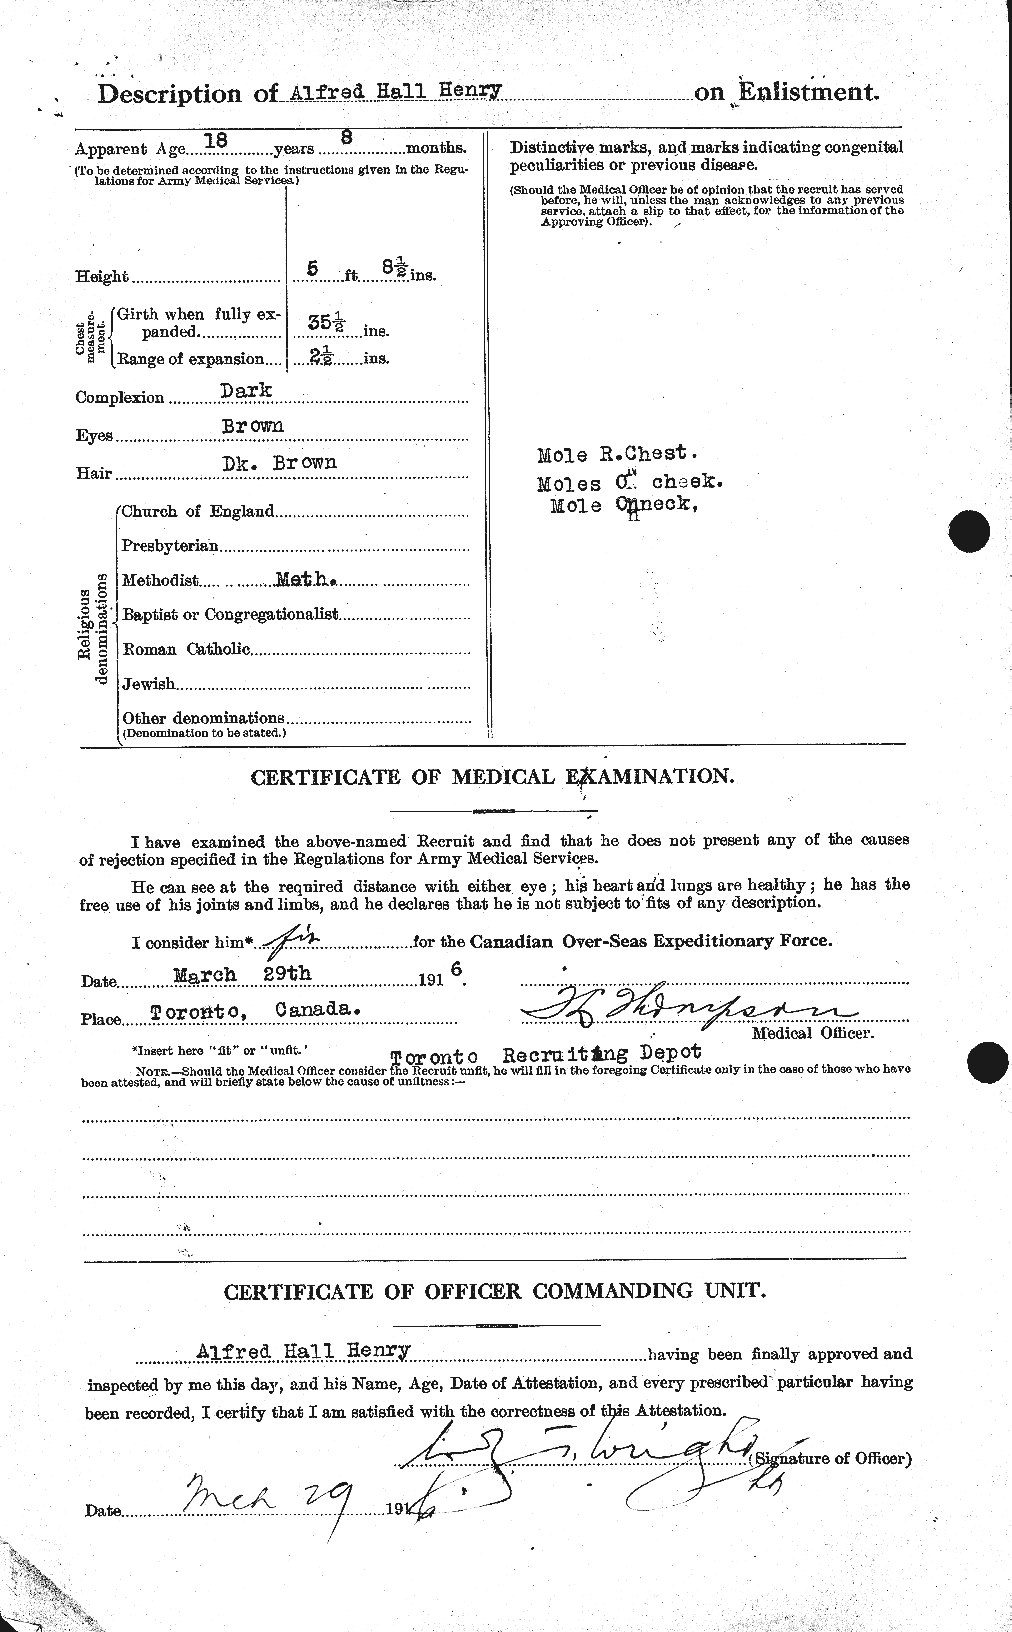 Personnel Records of the First World War - CEF 392770b